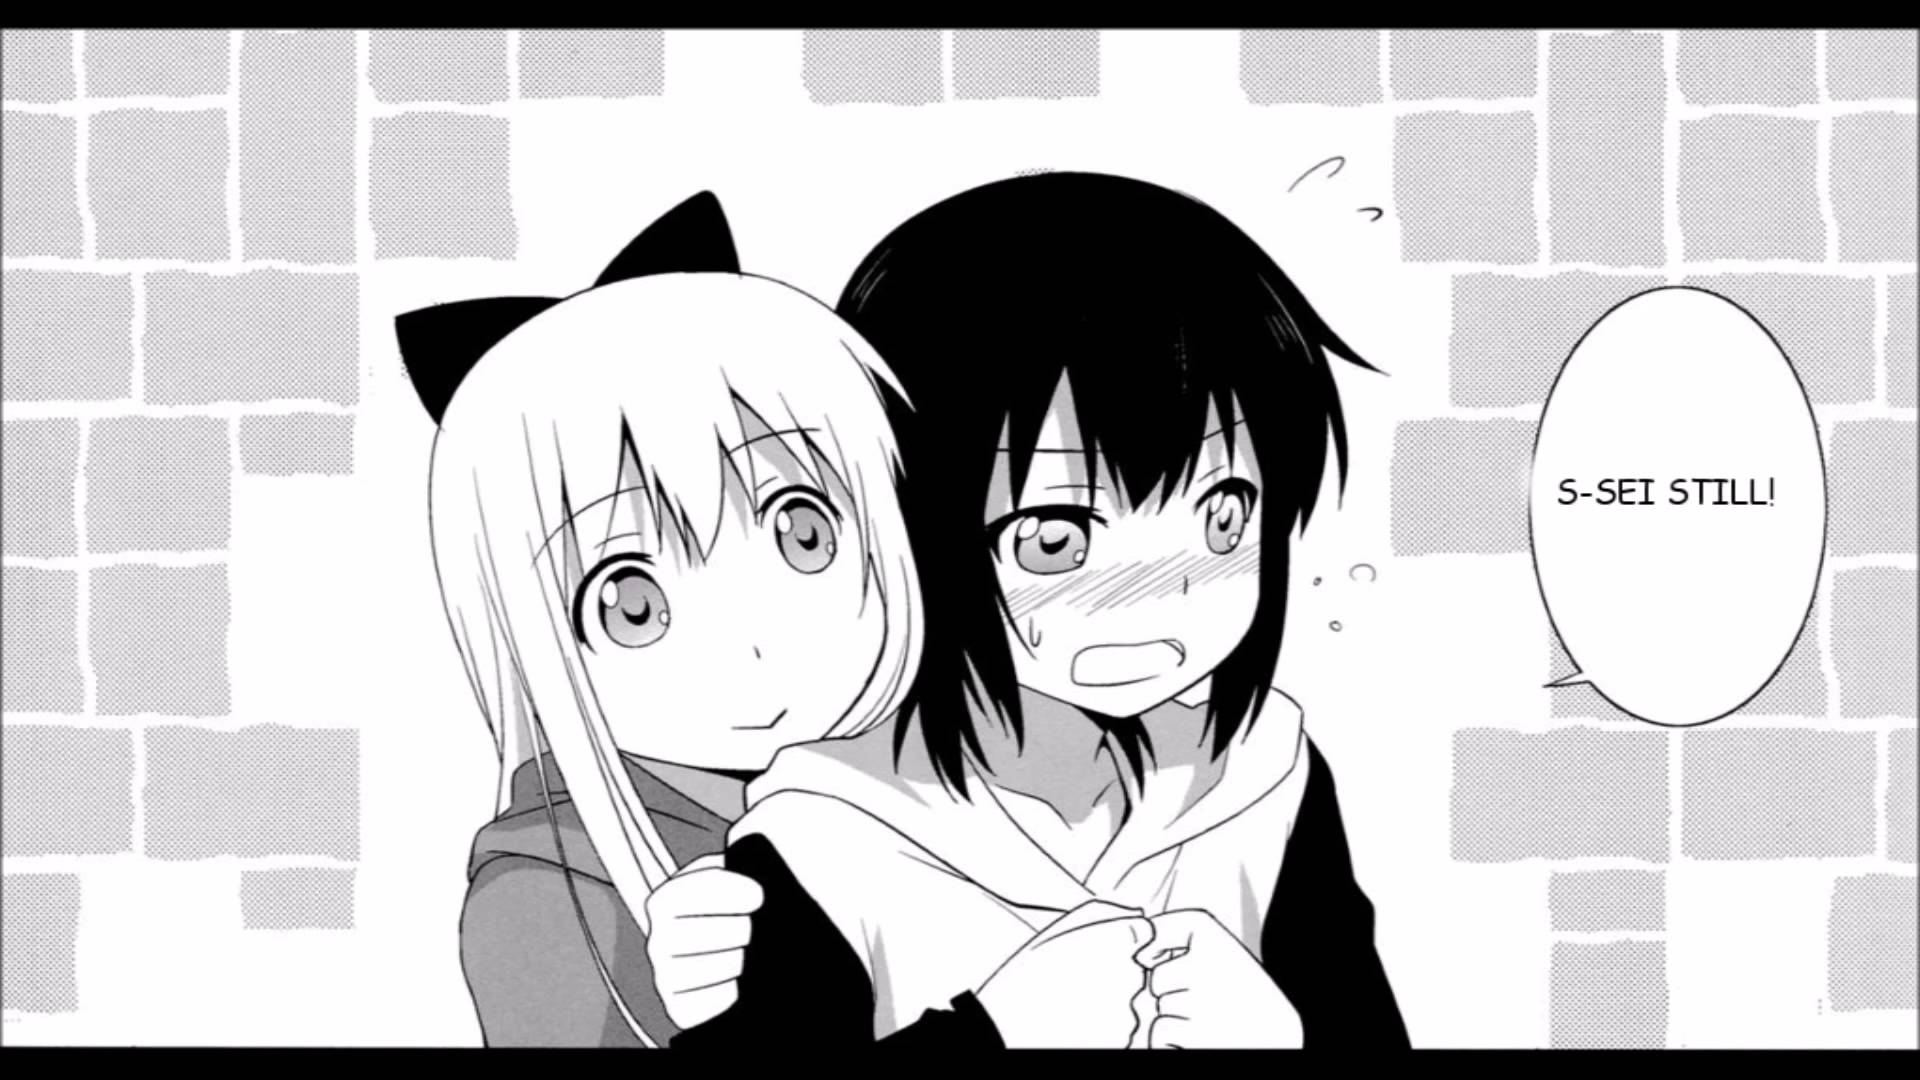 A Book with Yui and Kyouko Kissing and Hugging Only (Yuru Yuri)